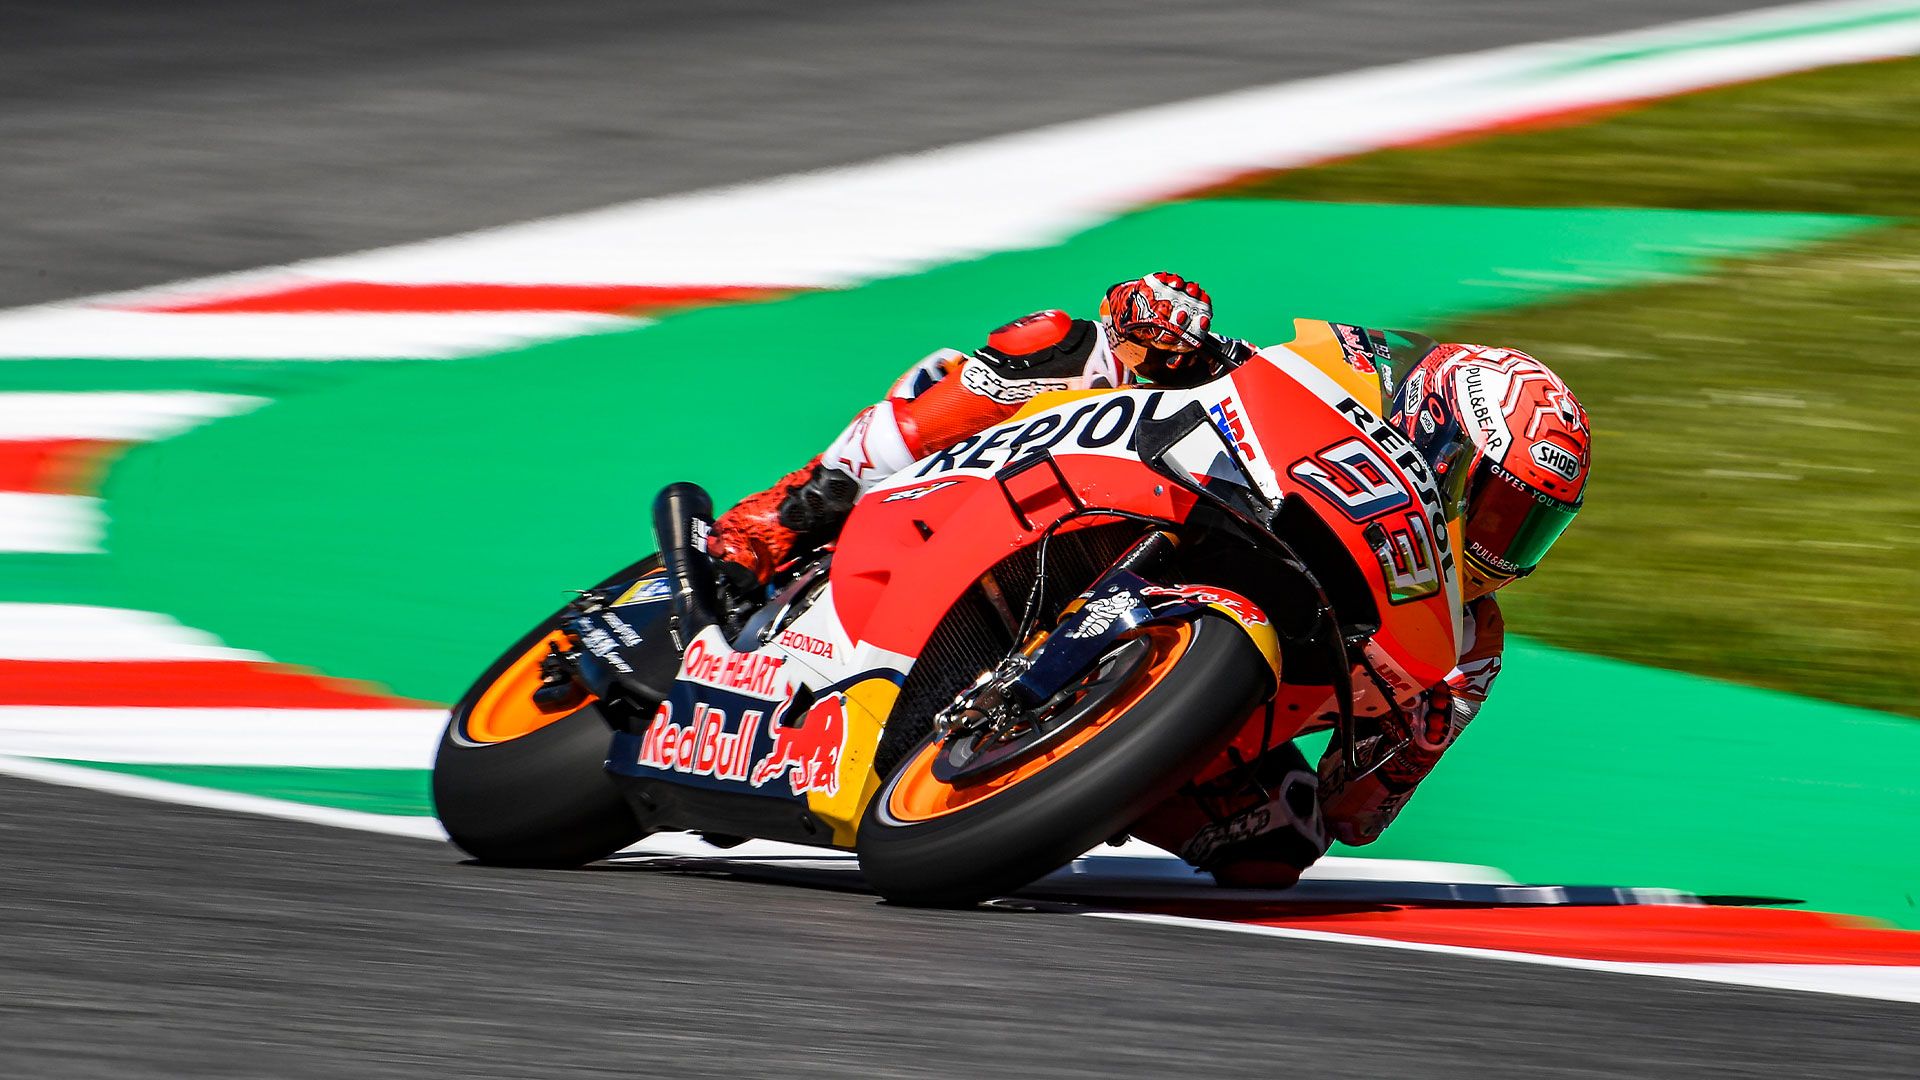 Starting out of the pit lane and win a lot of positions? Only Marquez can do that, humans can't '- Pol Espargaro